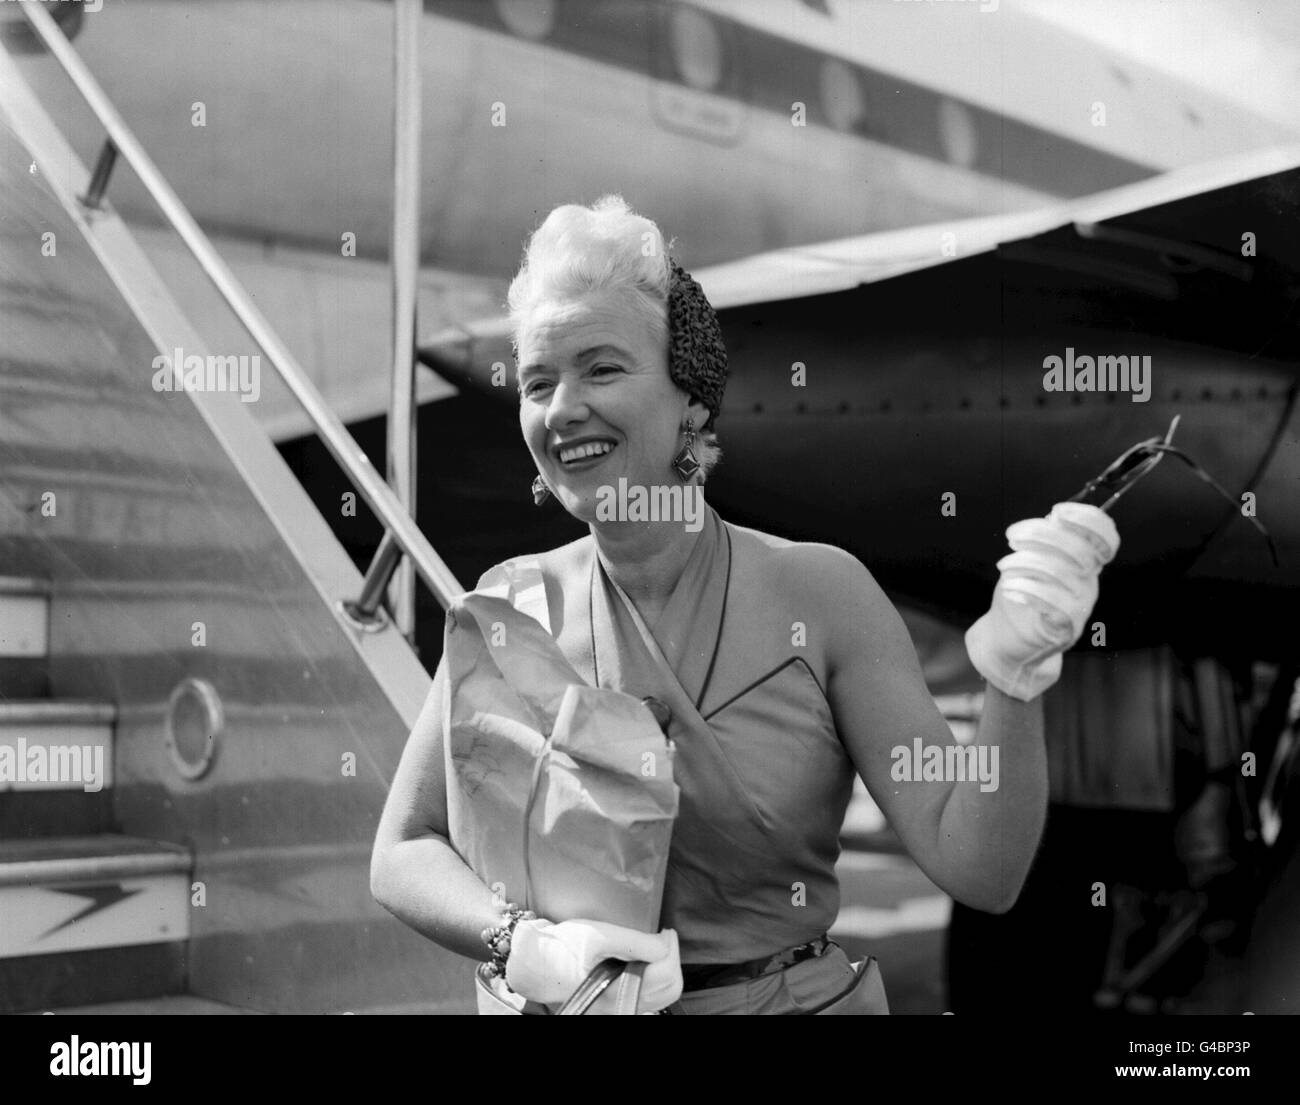 PA NEWS PHOTO 8/7/53 BRITISH SINGER DOROTHY SQUIRES ARRIVING AT HEATHROW LONDON AIRPORT BY A B.O.A.C. LINER FROM NEW YORK Stock Photo